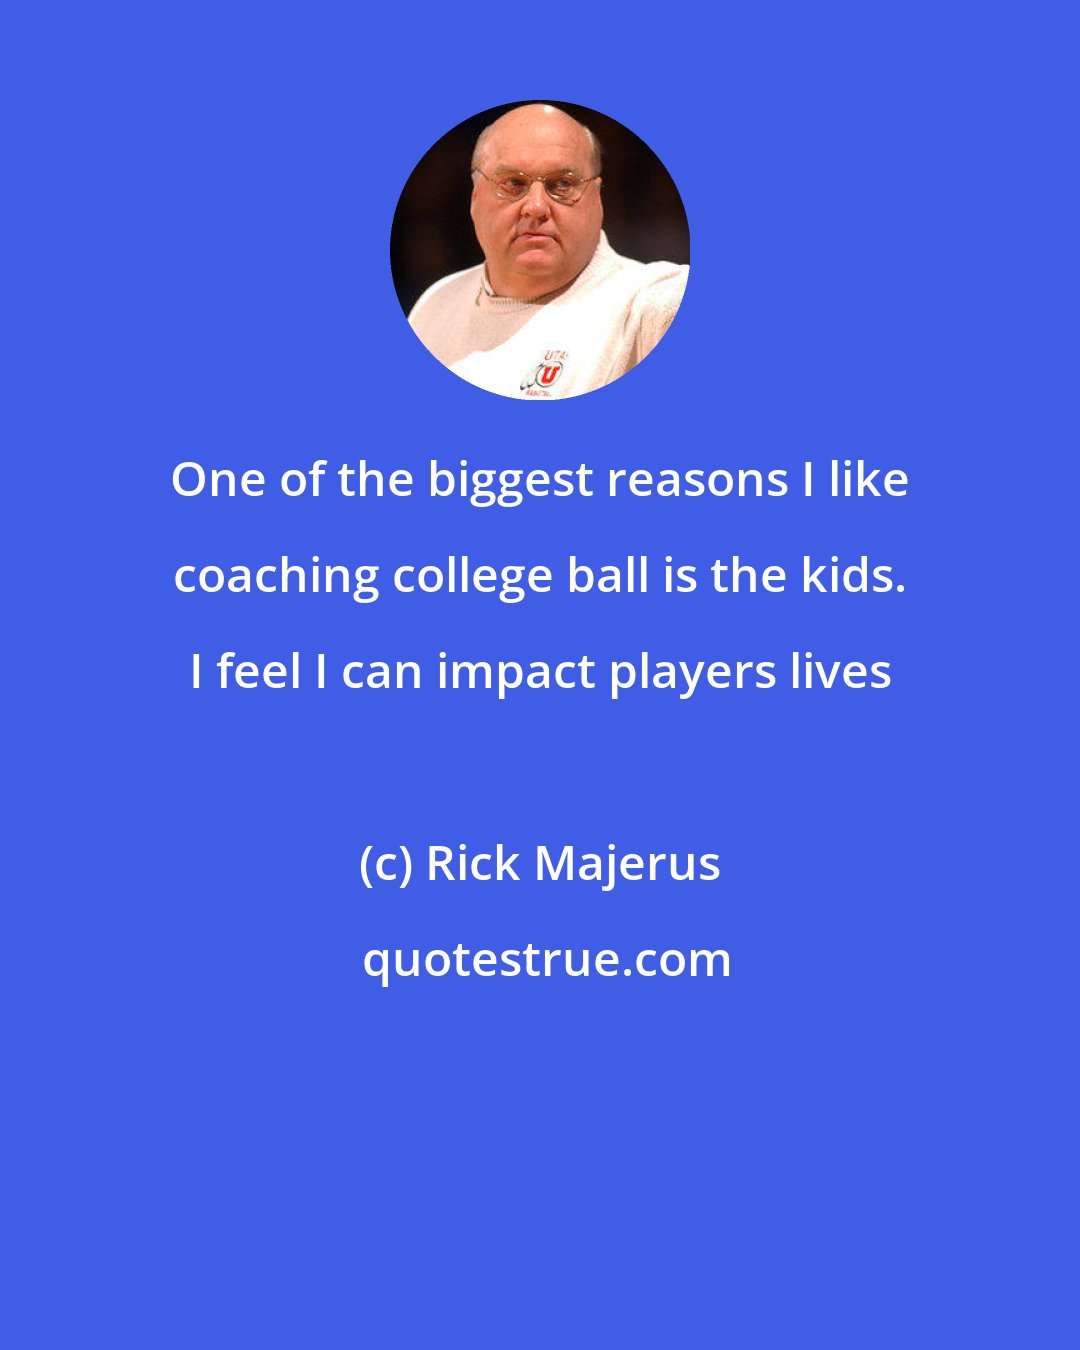 Rick Majerus: One of the biggest reasons I like coaching college ball is the kids. I feel I can impact players lives